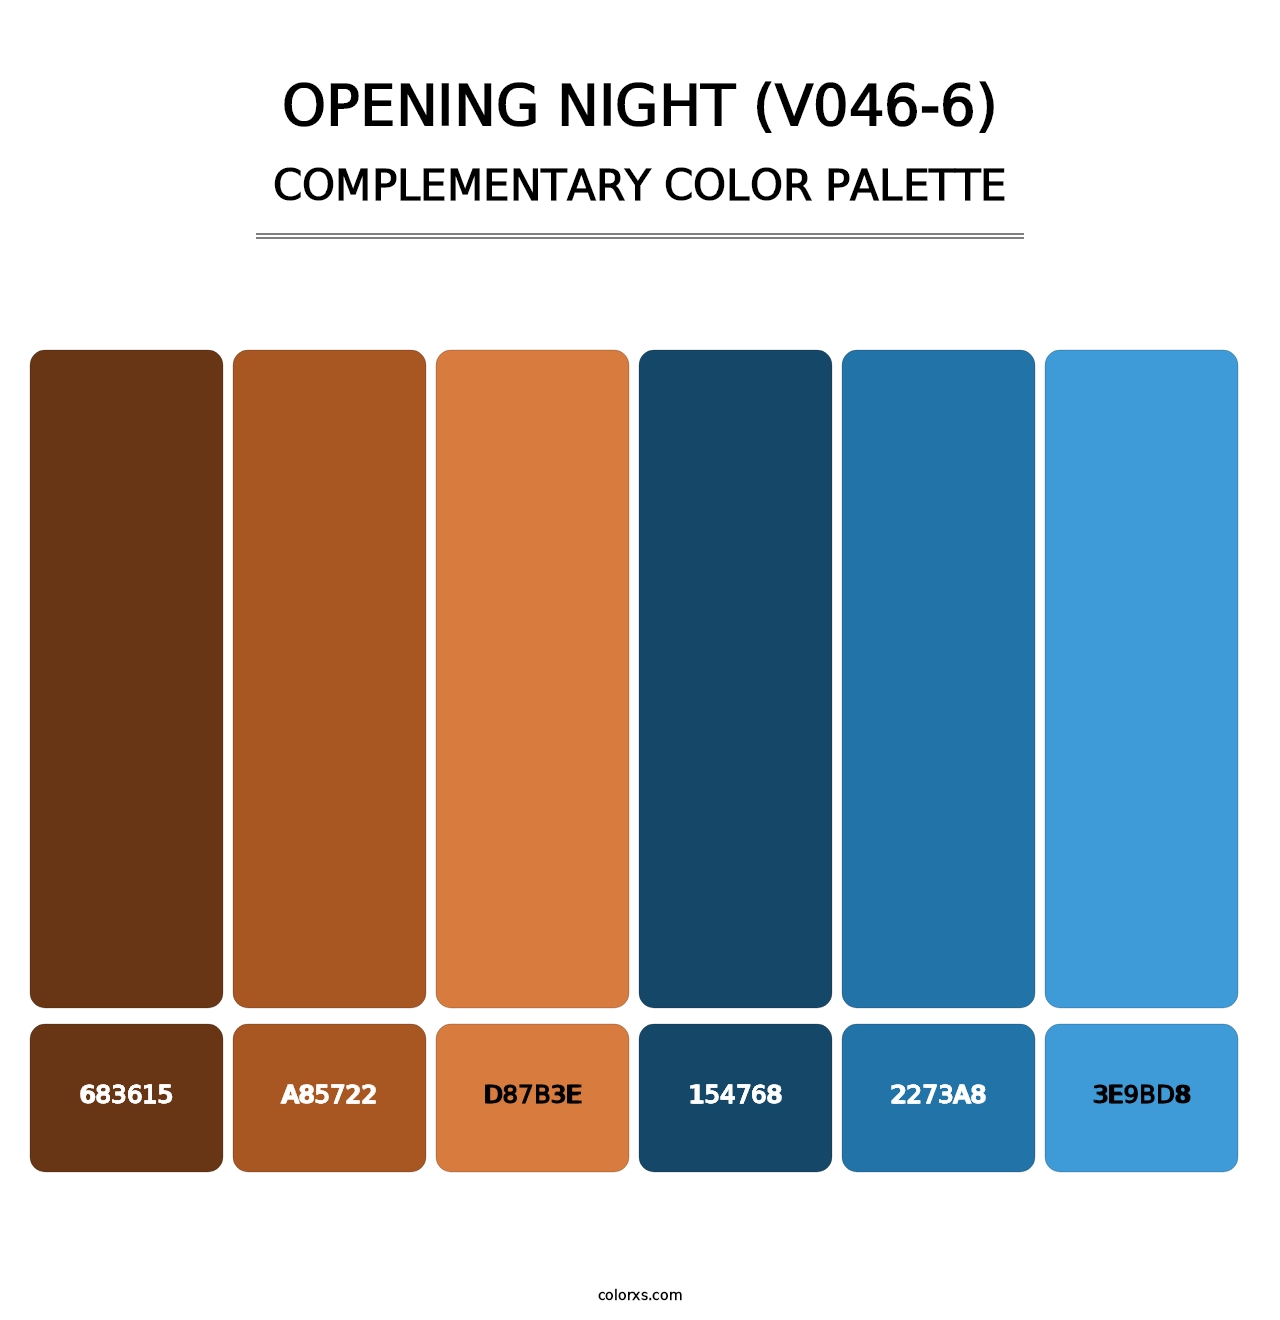 Opening Night (V046-6) - Complementary Color Palette